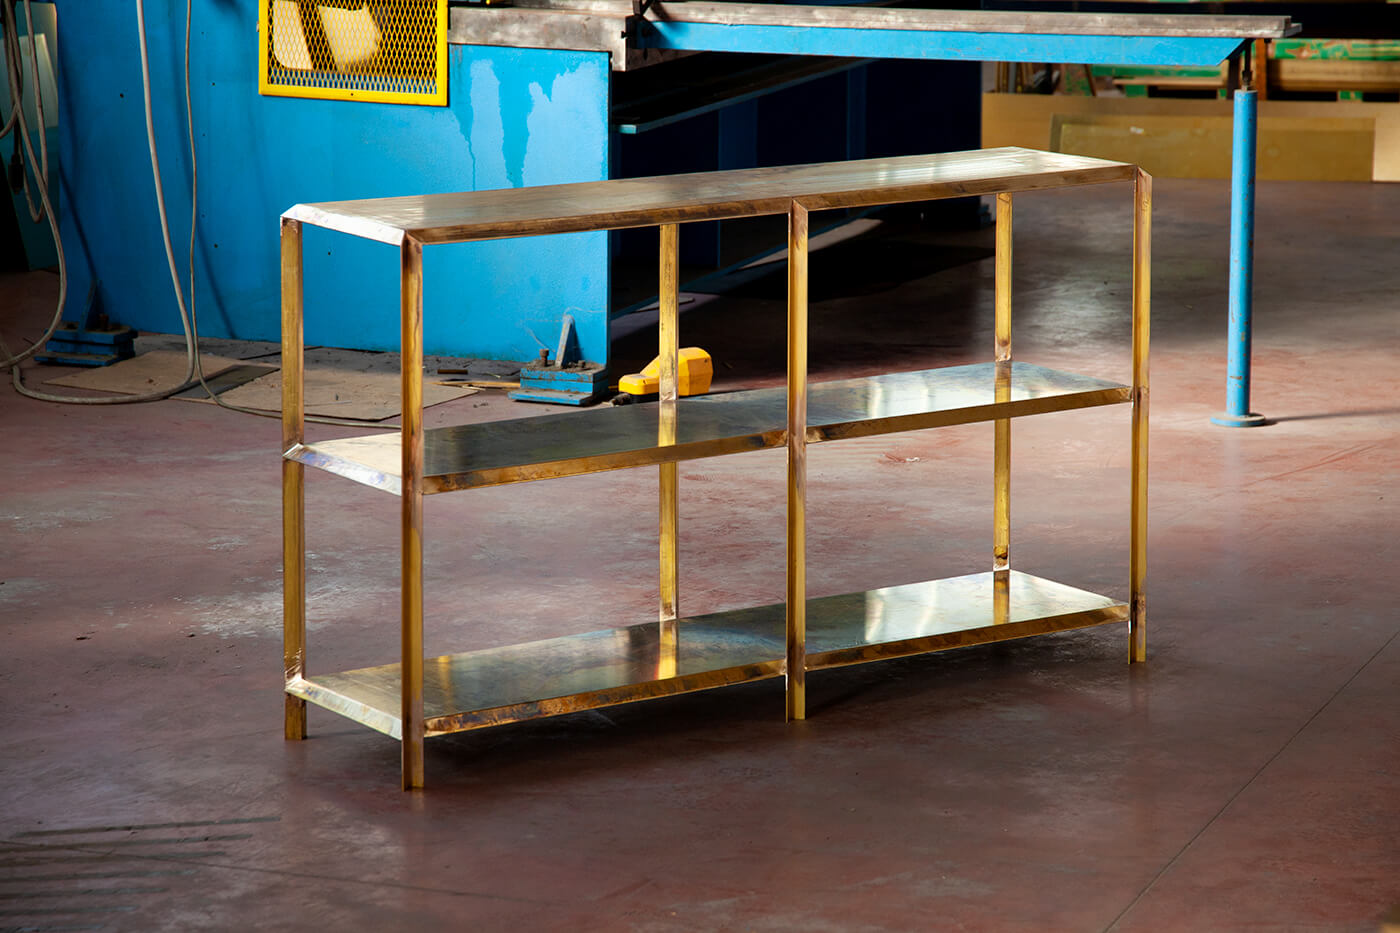 Marco Campardo Elle Collection Brass Console Wallpaper Design Awards winner for Seeds London Gallery work in progress